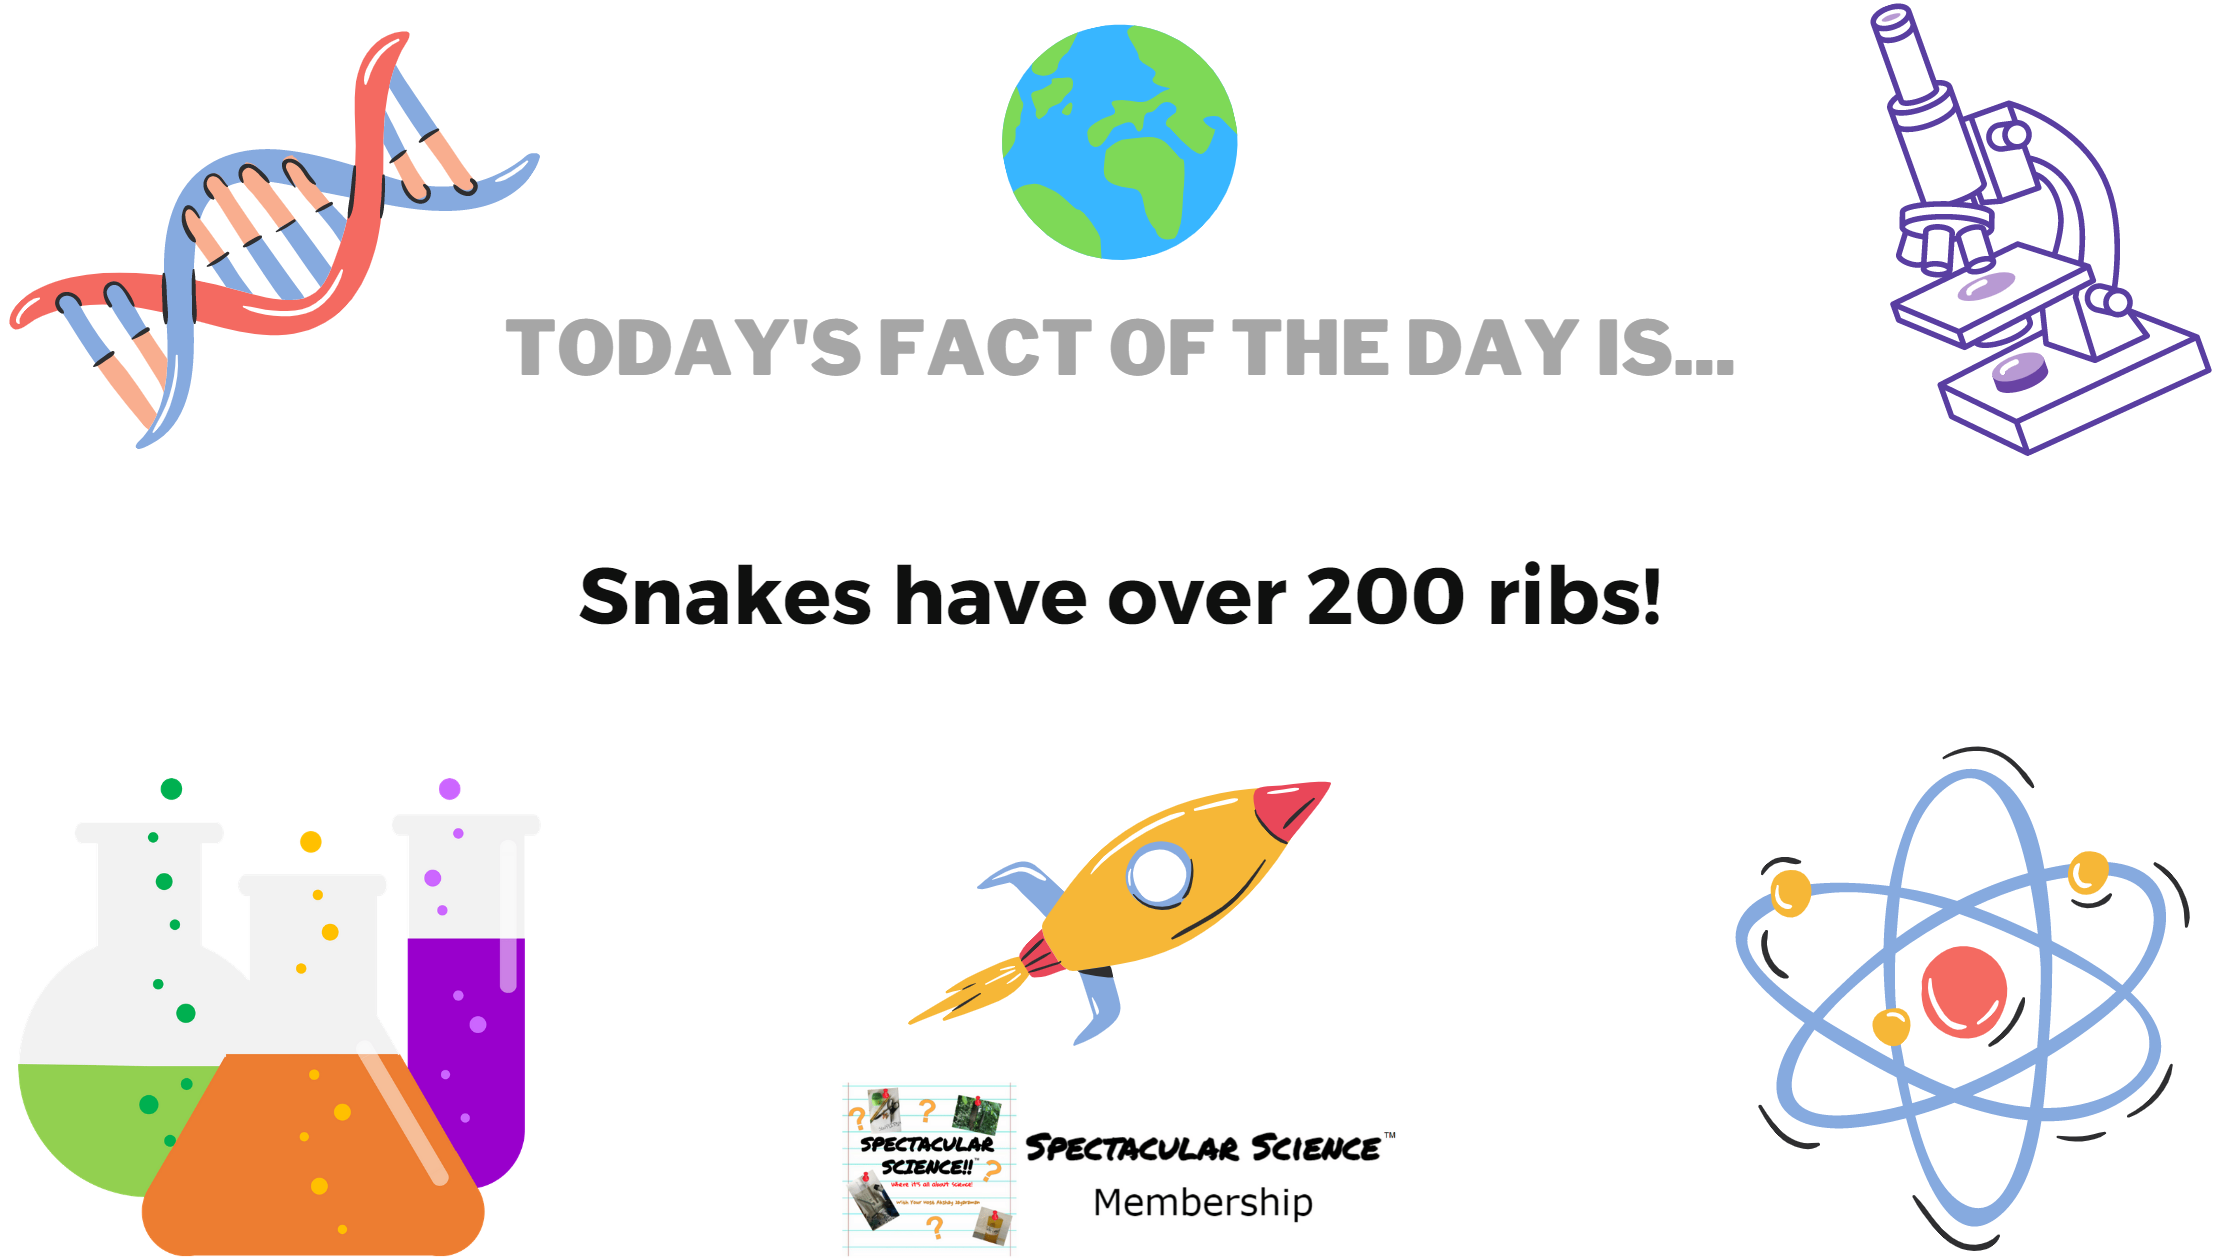 Fact of the Day Image May 12